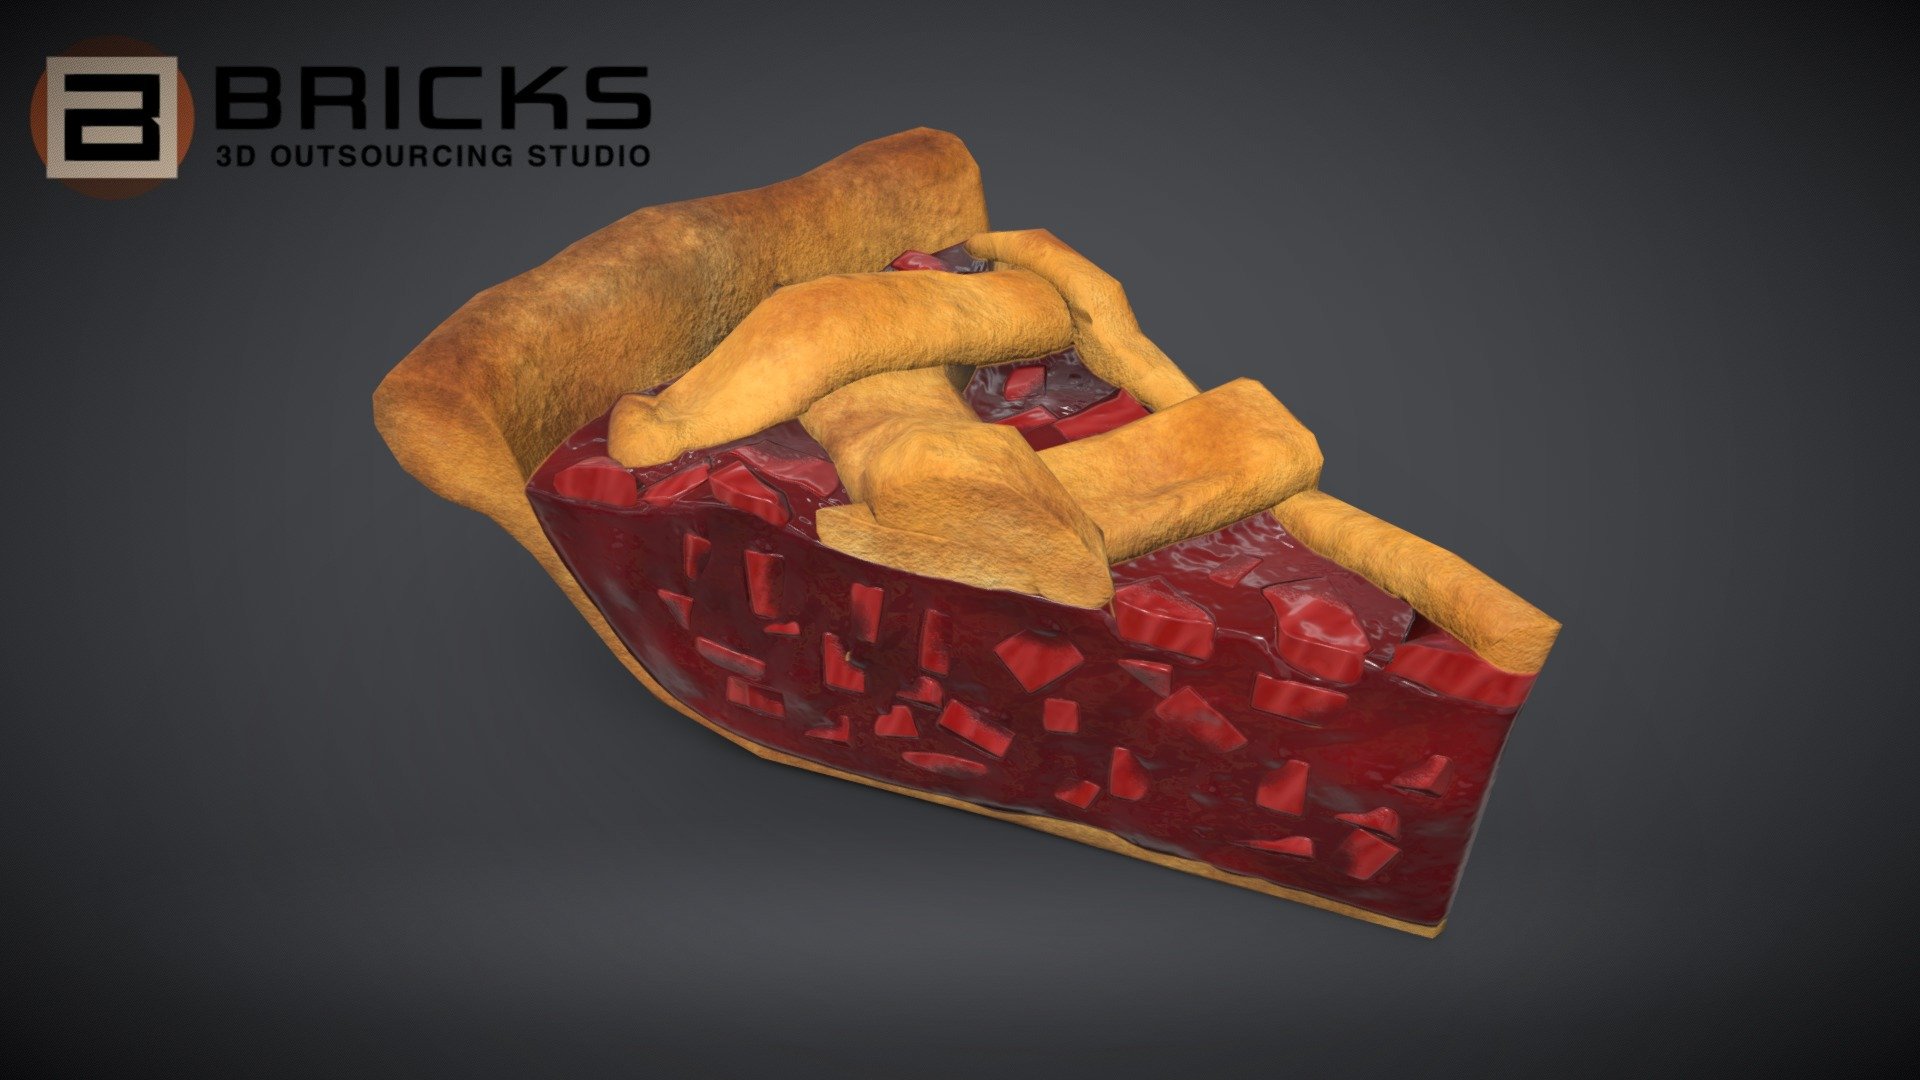 PBR Food Asset:
RhubarbPie_Piece
Polycount: 698
Vertex count: 351
Texture Size: 2048px x 2048px
Normal: OpenGL

If you need any adjust in file please contact us: team@bricks3dstudio.com

Hire us: tringuyen@bricks3dstudio.com
Here is us: https://www.bricks3dstudio.com/
        https://www.artstation.com/bricksstudio
        https://www.facebook.com/Bricks3dstudio/
        https://www.linkedin.com/in/bricks-studio-b10462252/ - RhubarbPiePiece - Buy Royalty Free 3D model by Bricks Studio (@bricks3dstudio) 3d model